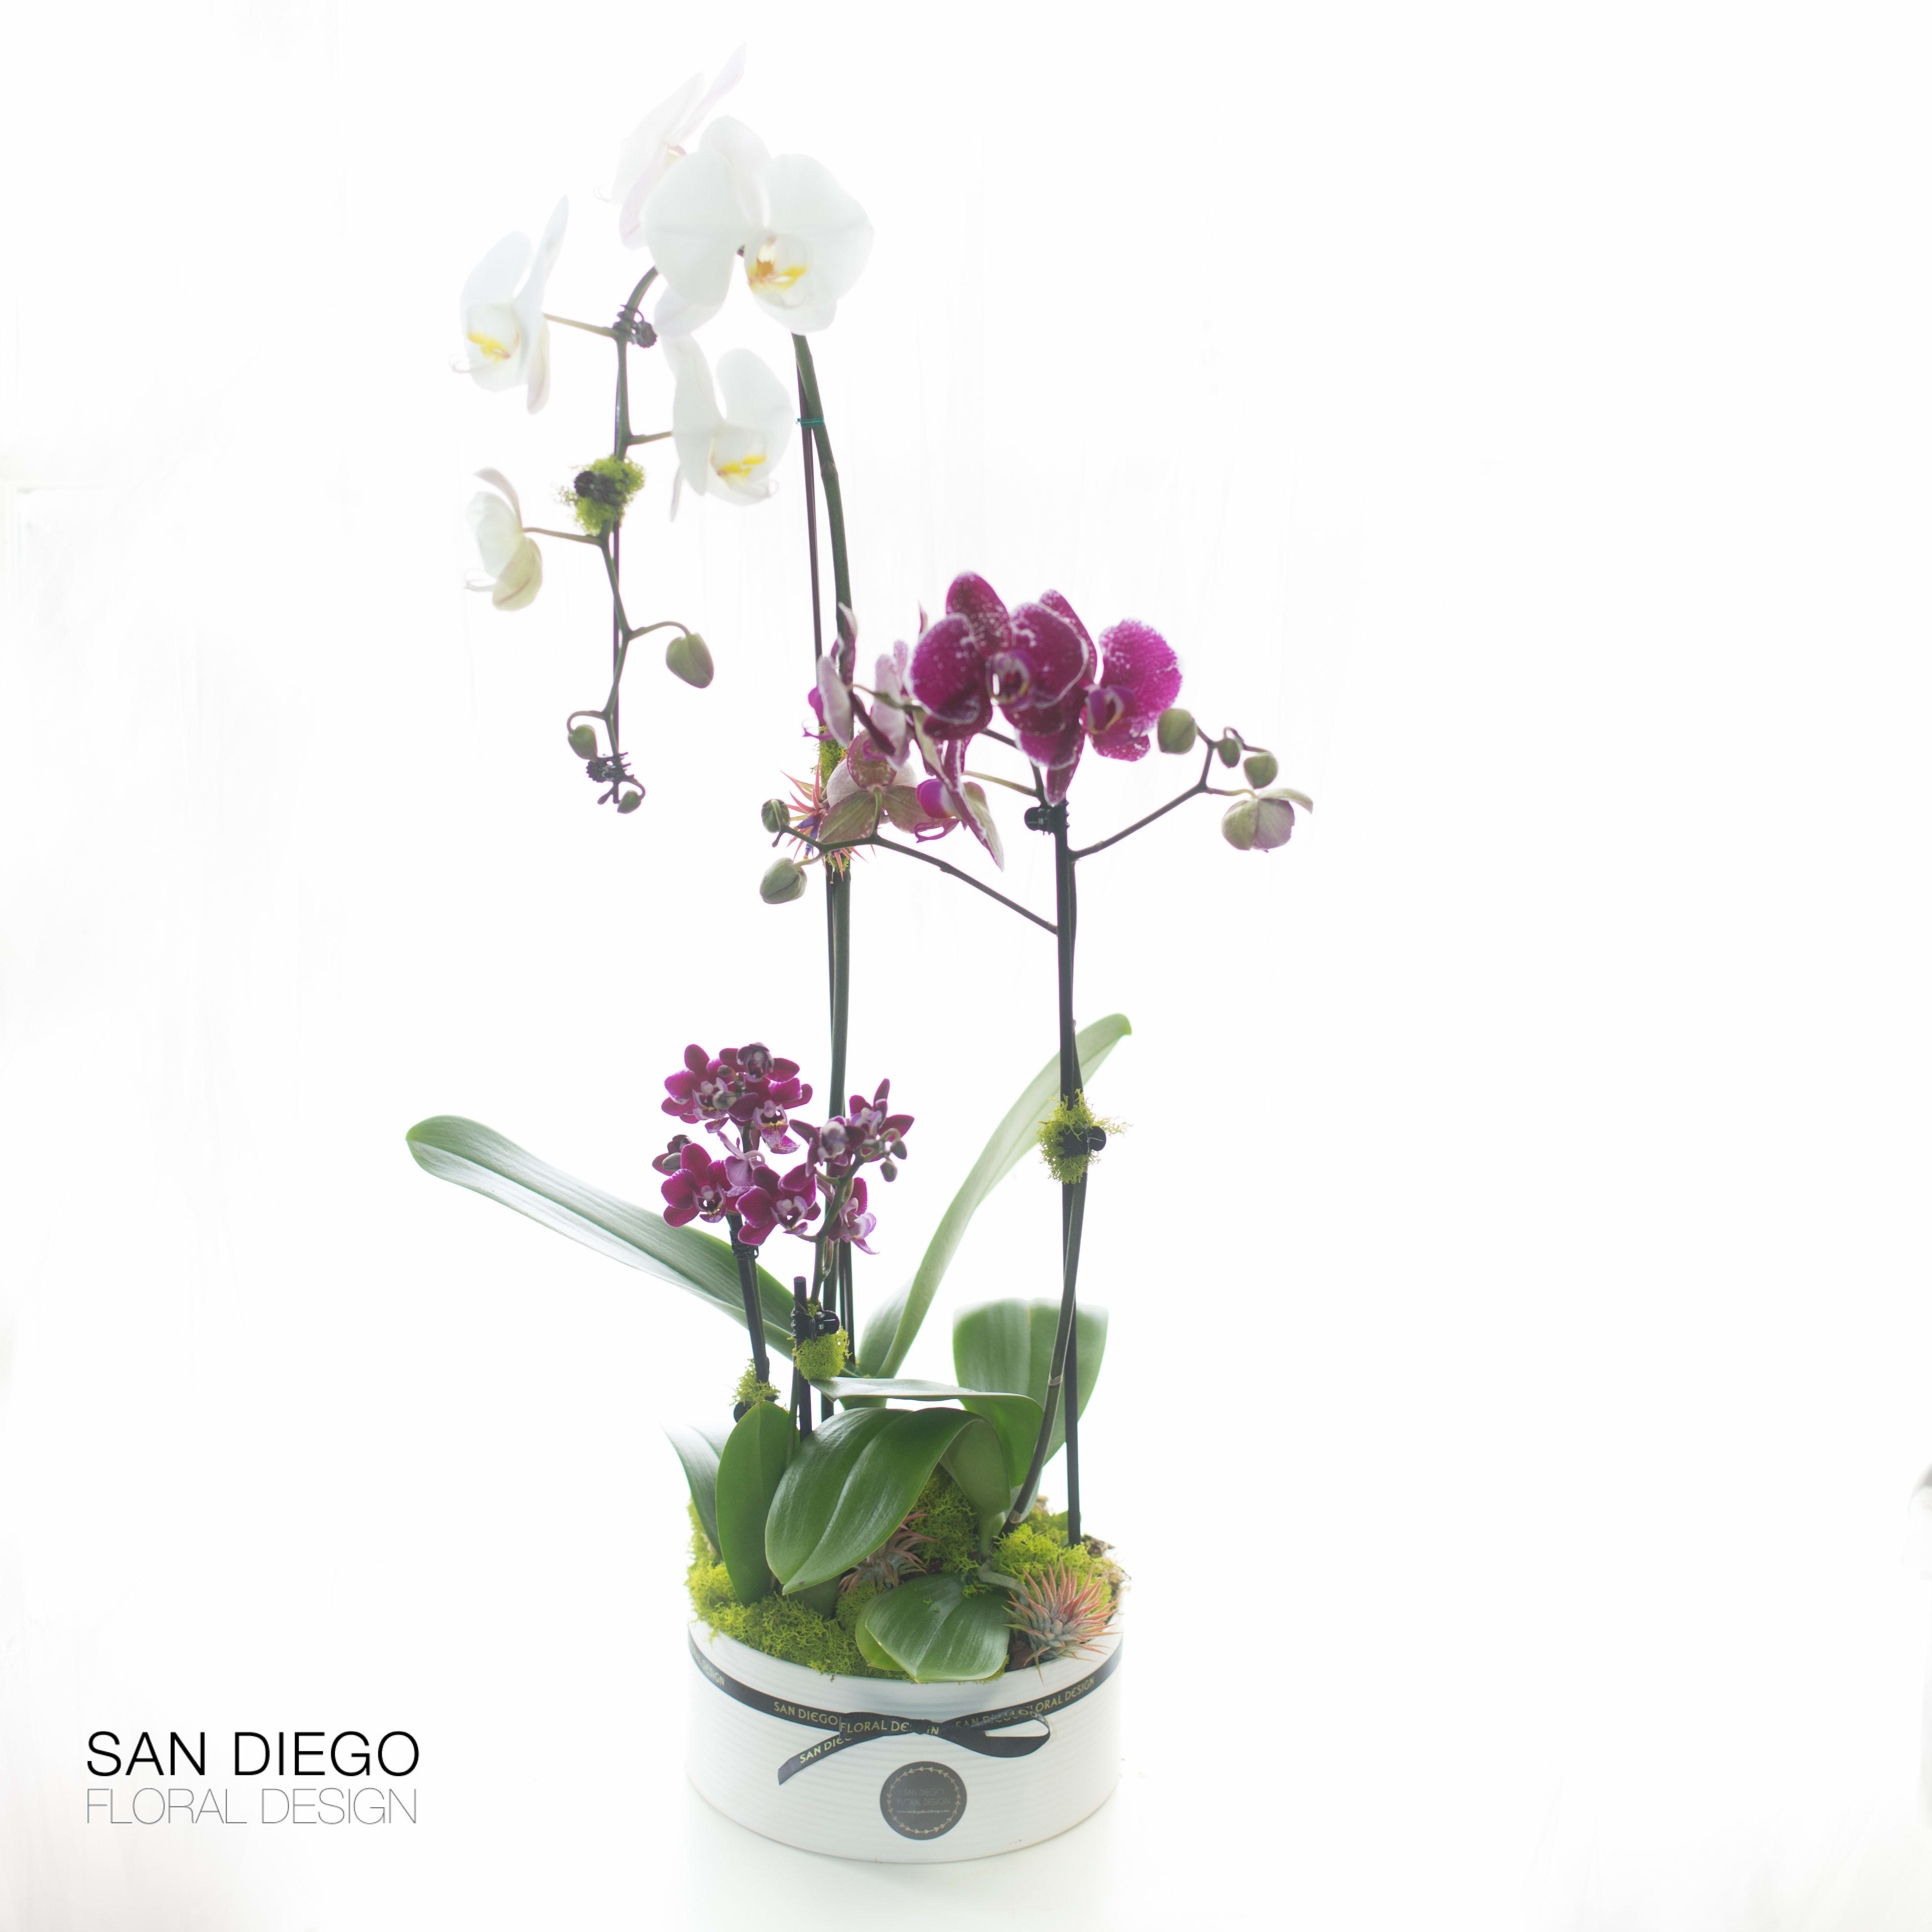 Orchid Garden  - White and purple orchids arranged in a white ceramic container accented by moss and air plants 